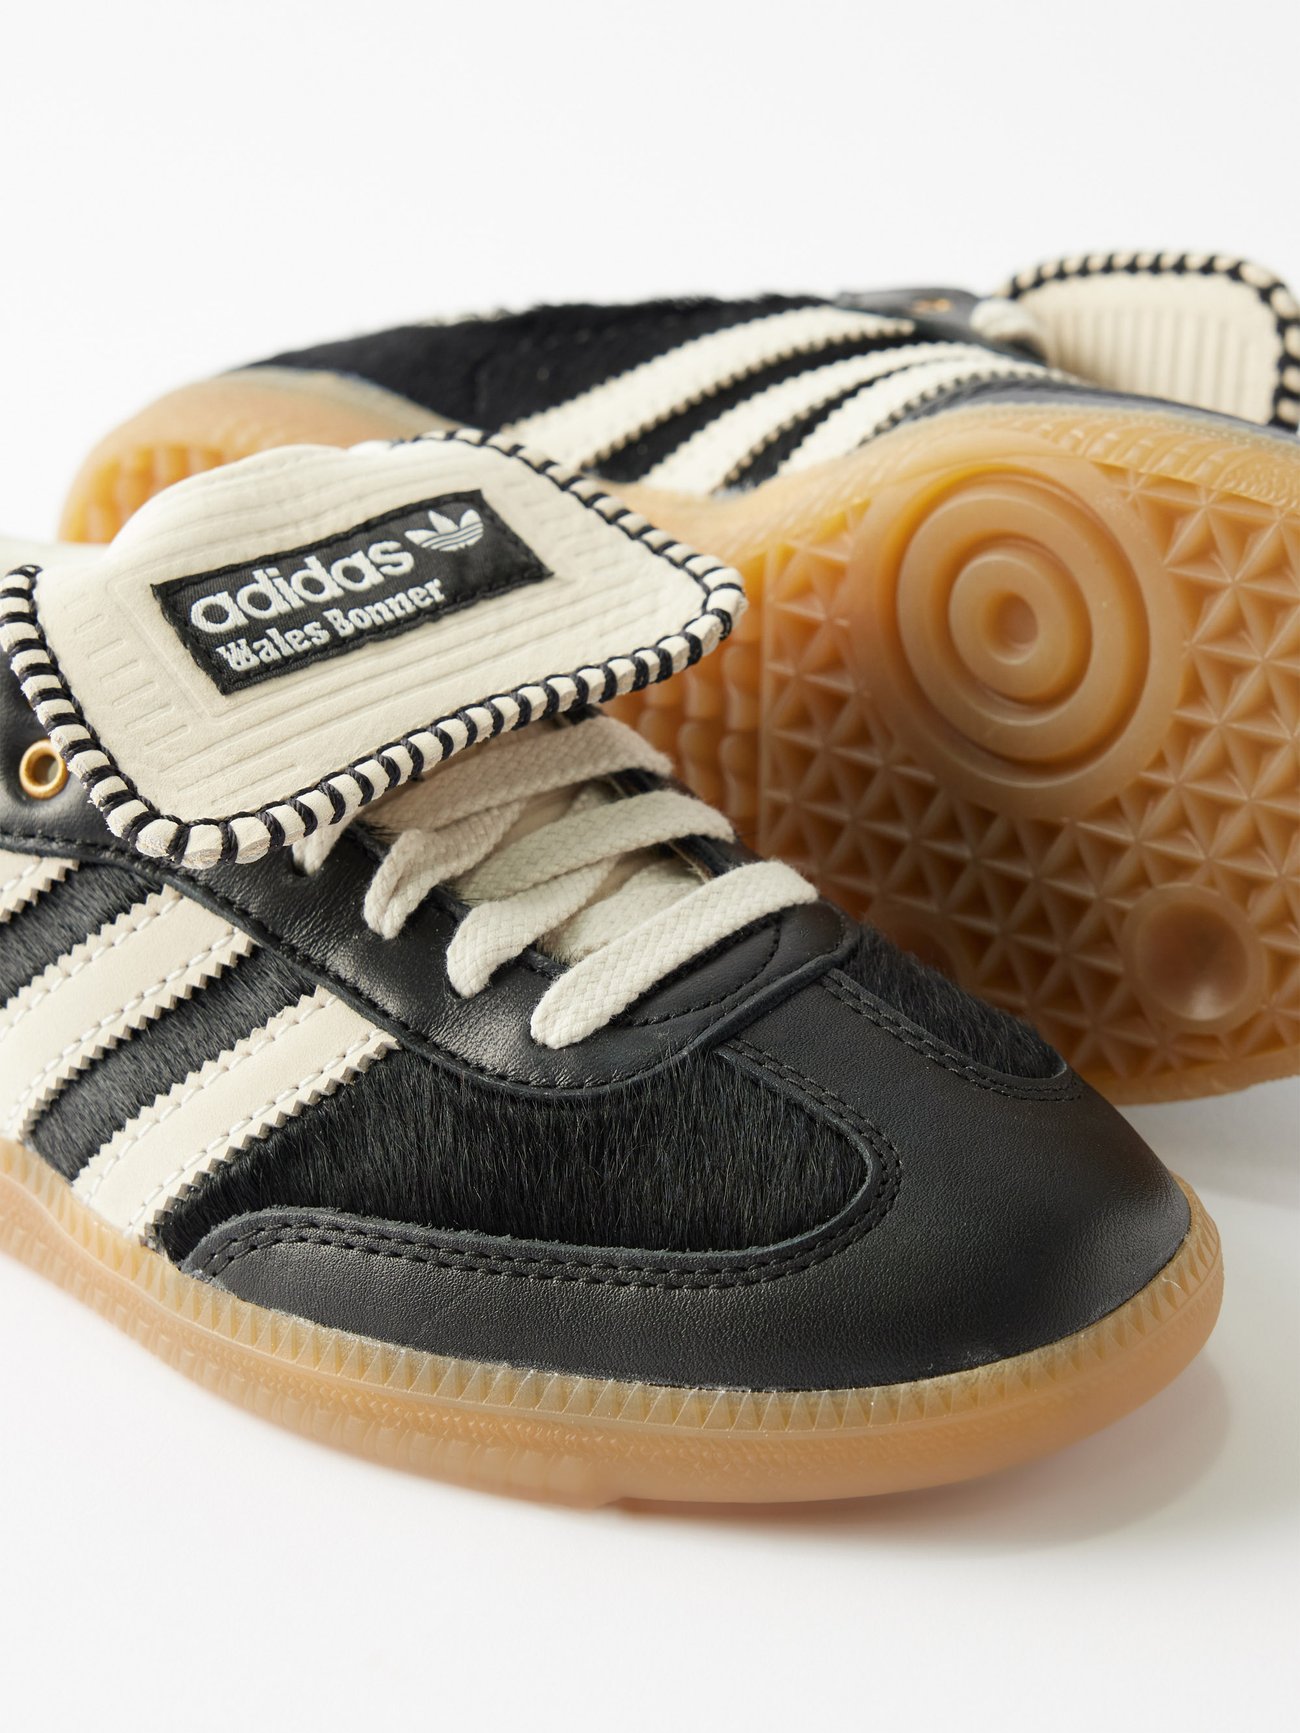 Black Samba leather and calf hair trainers | Wales Bonner